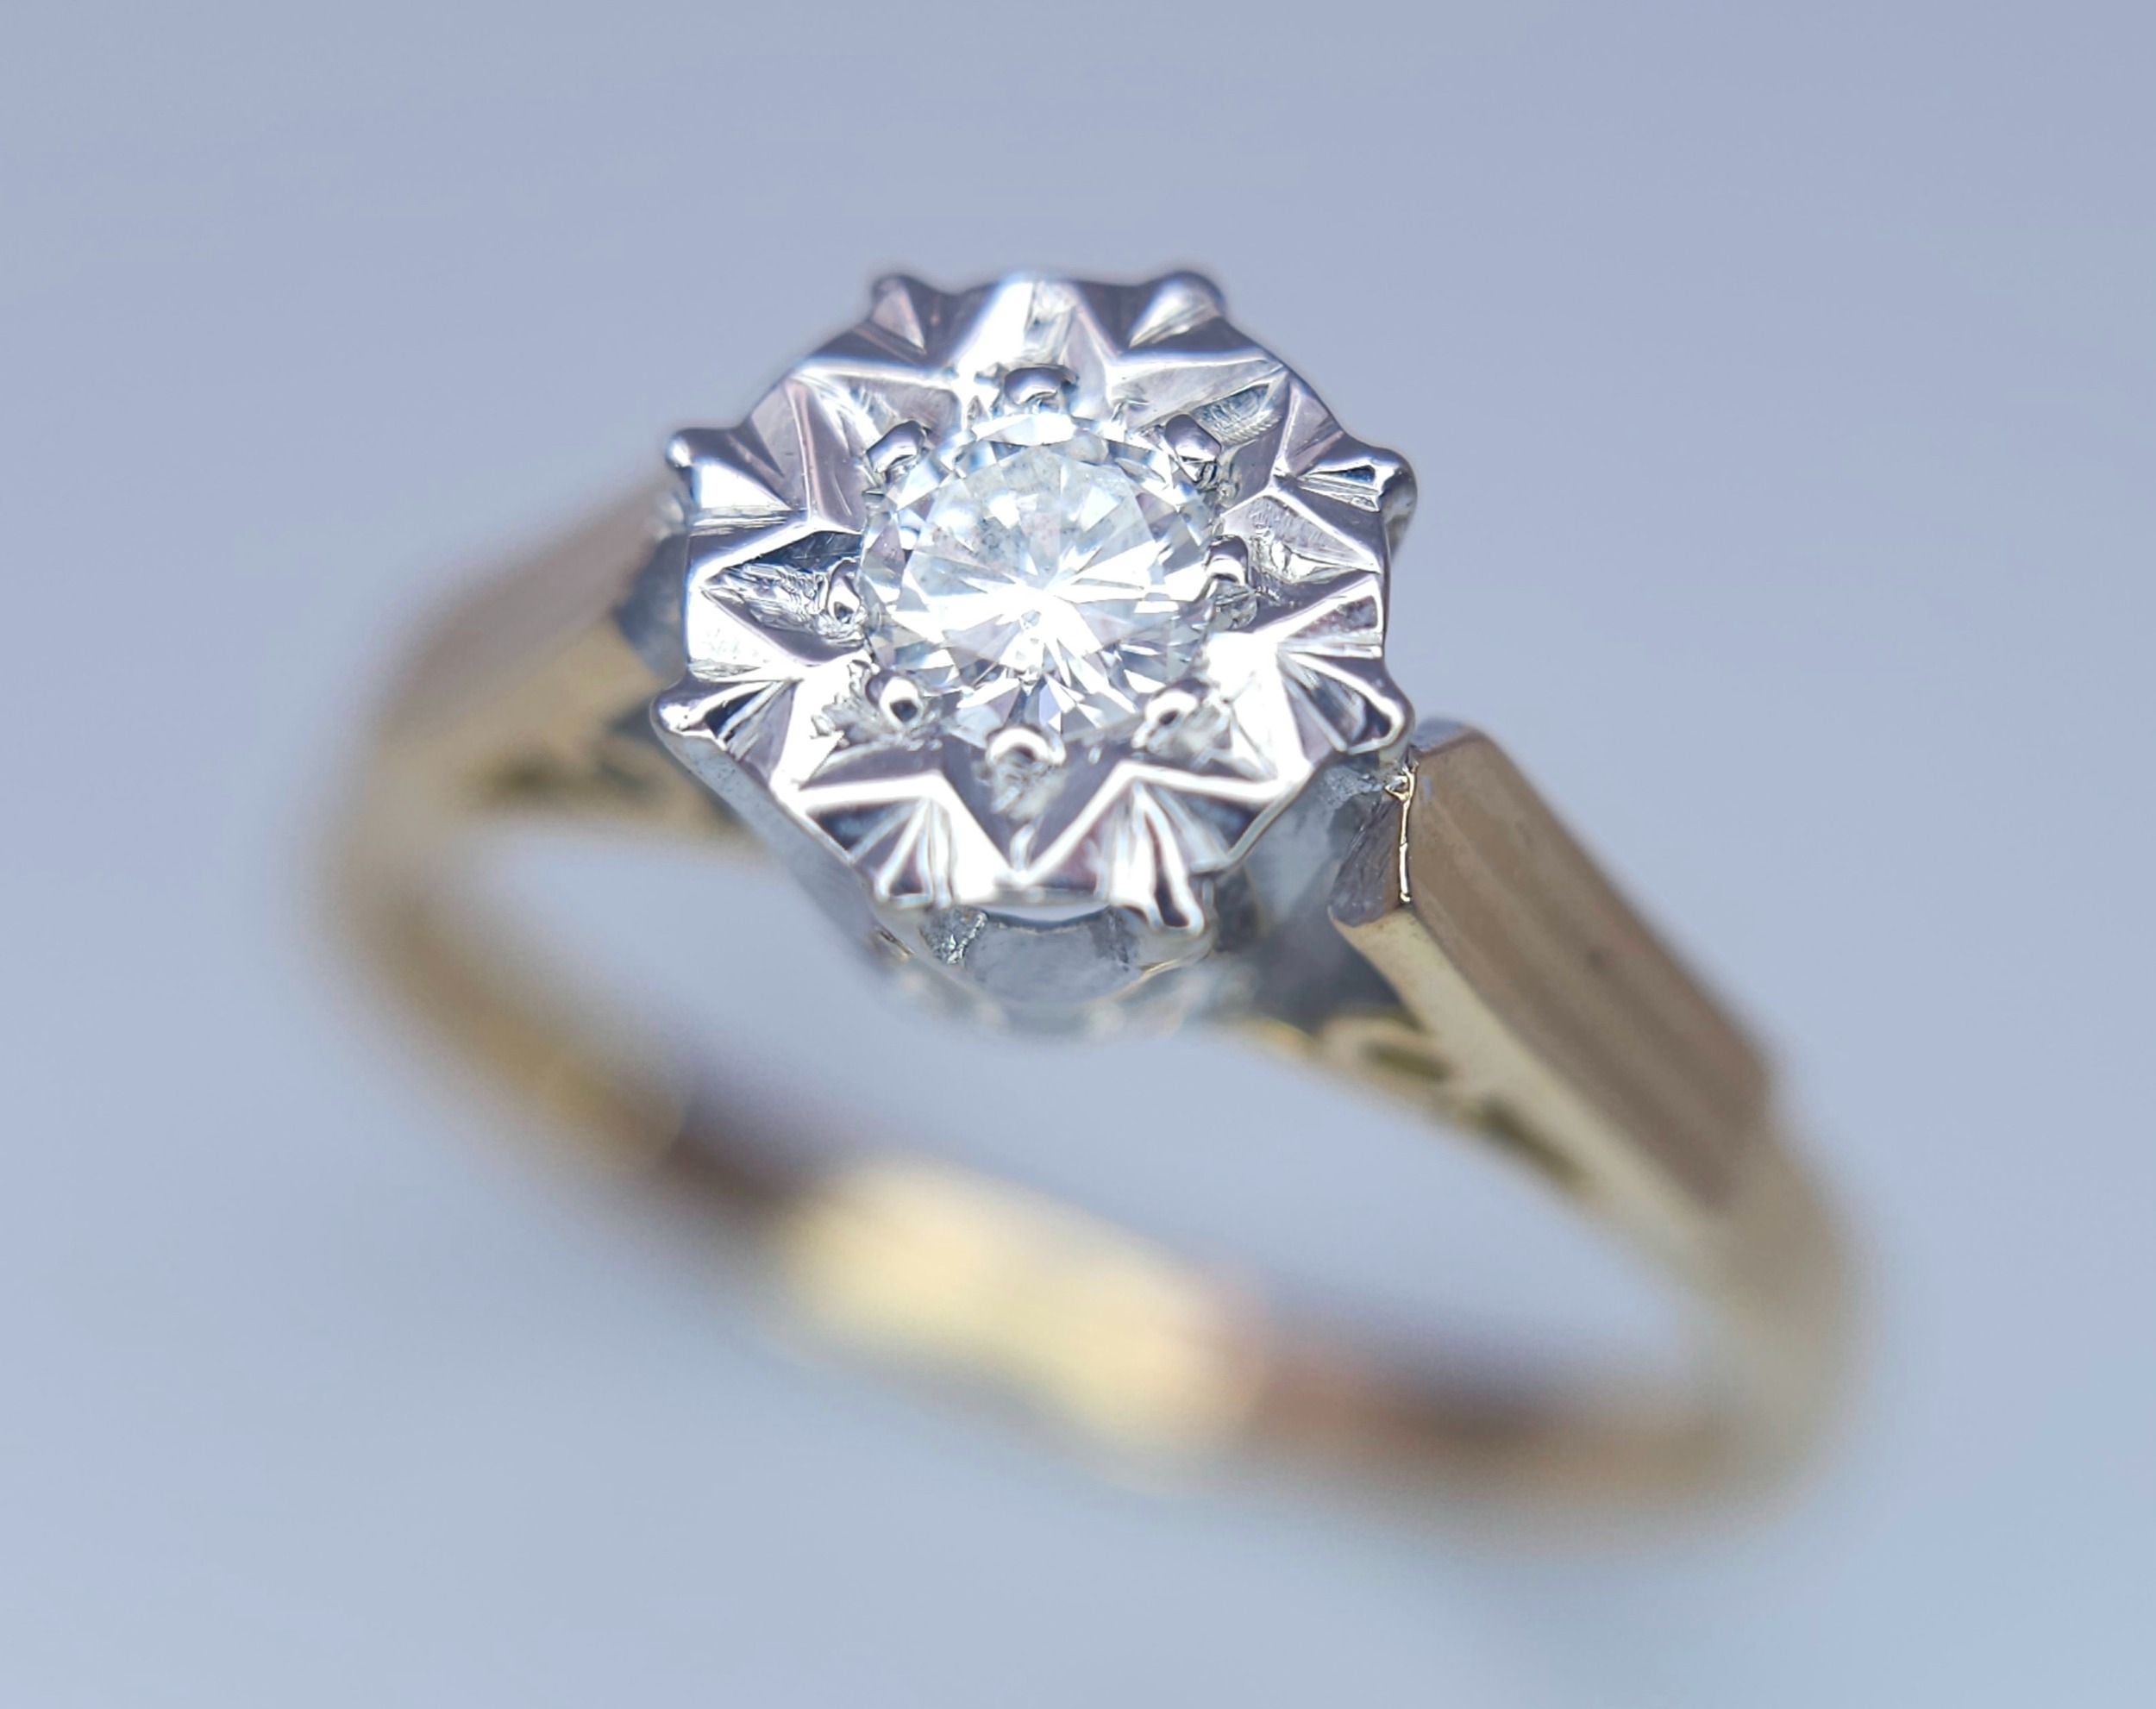 AN 18K YELLOW GOLD DIAMOND SOLITAIRE RING. 3.4G. SIZE O.